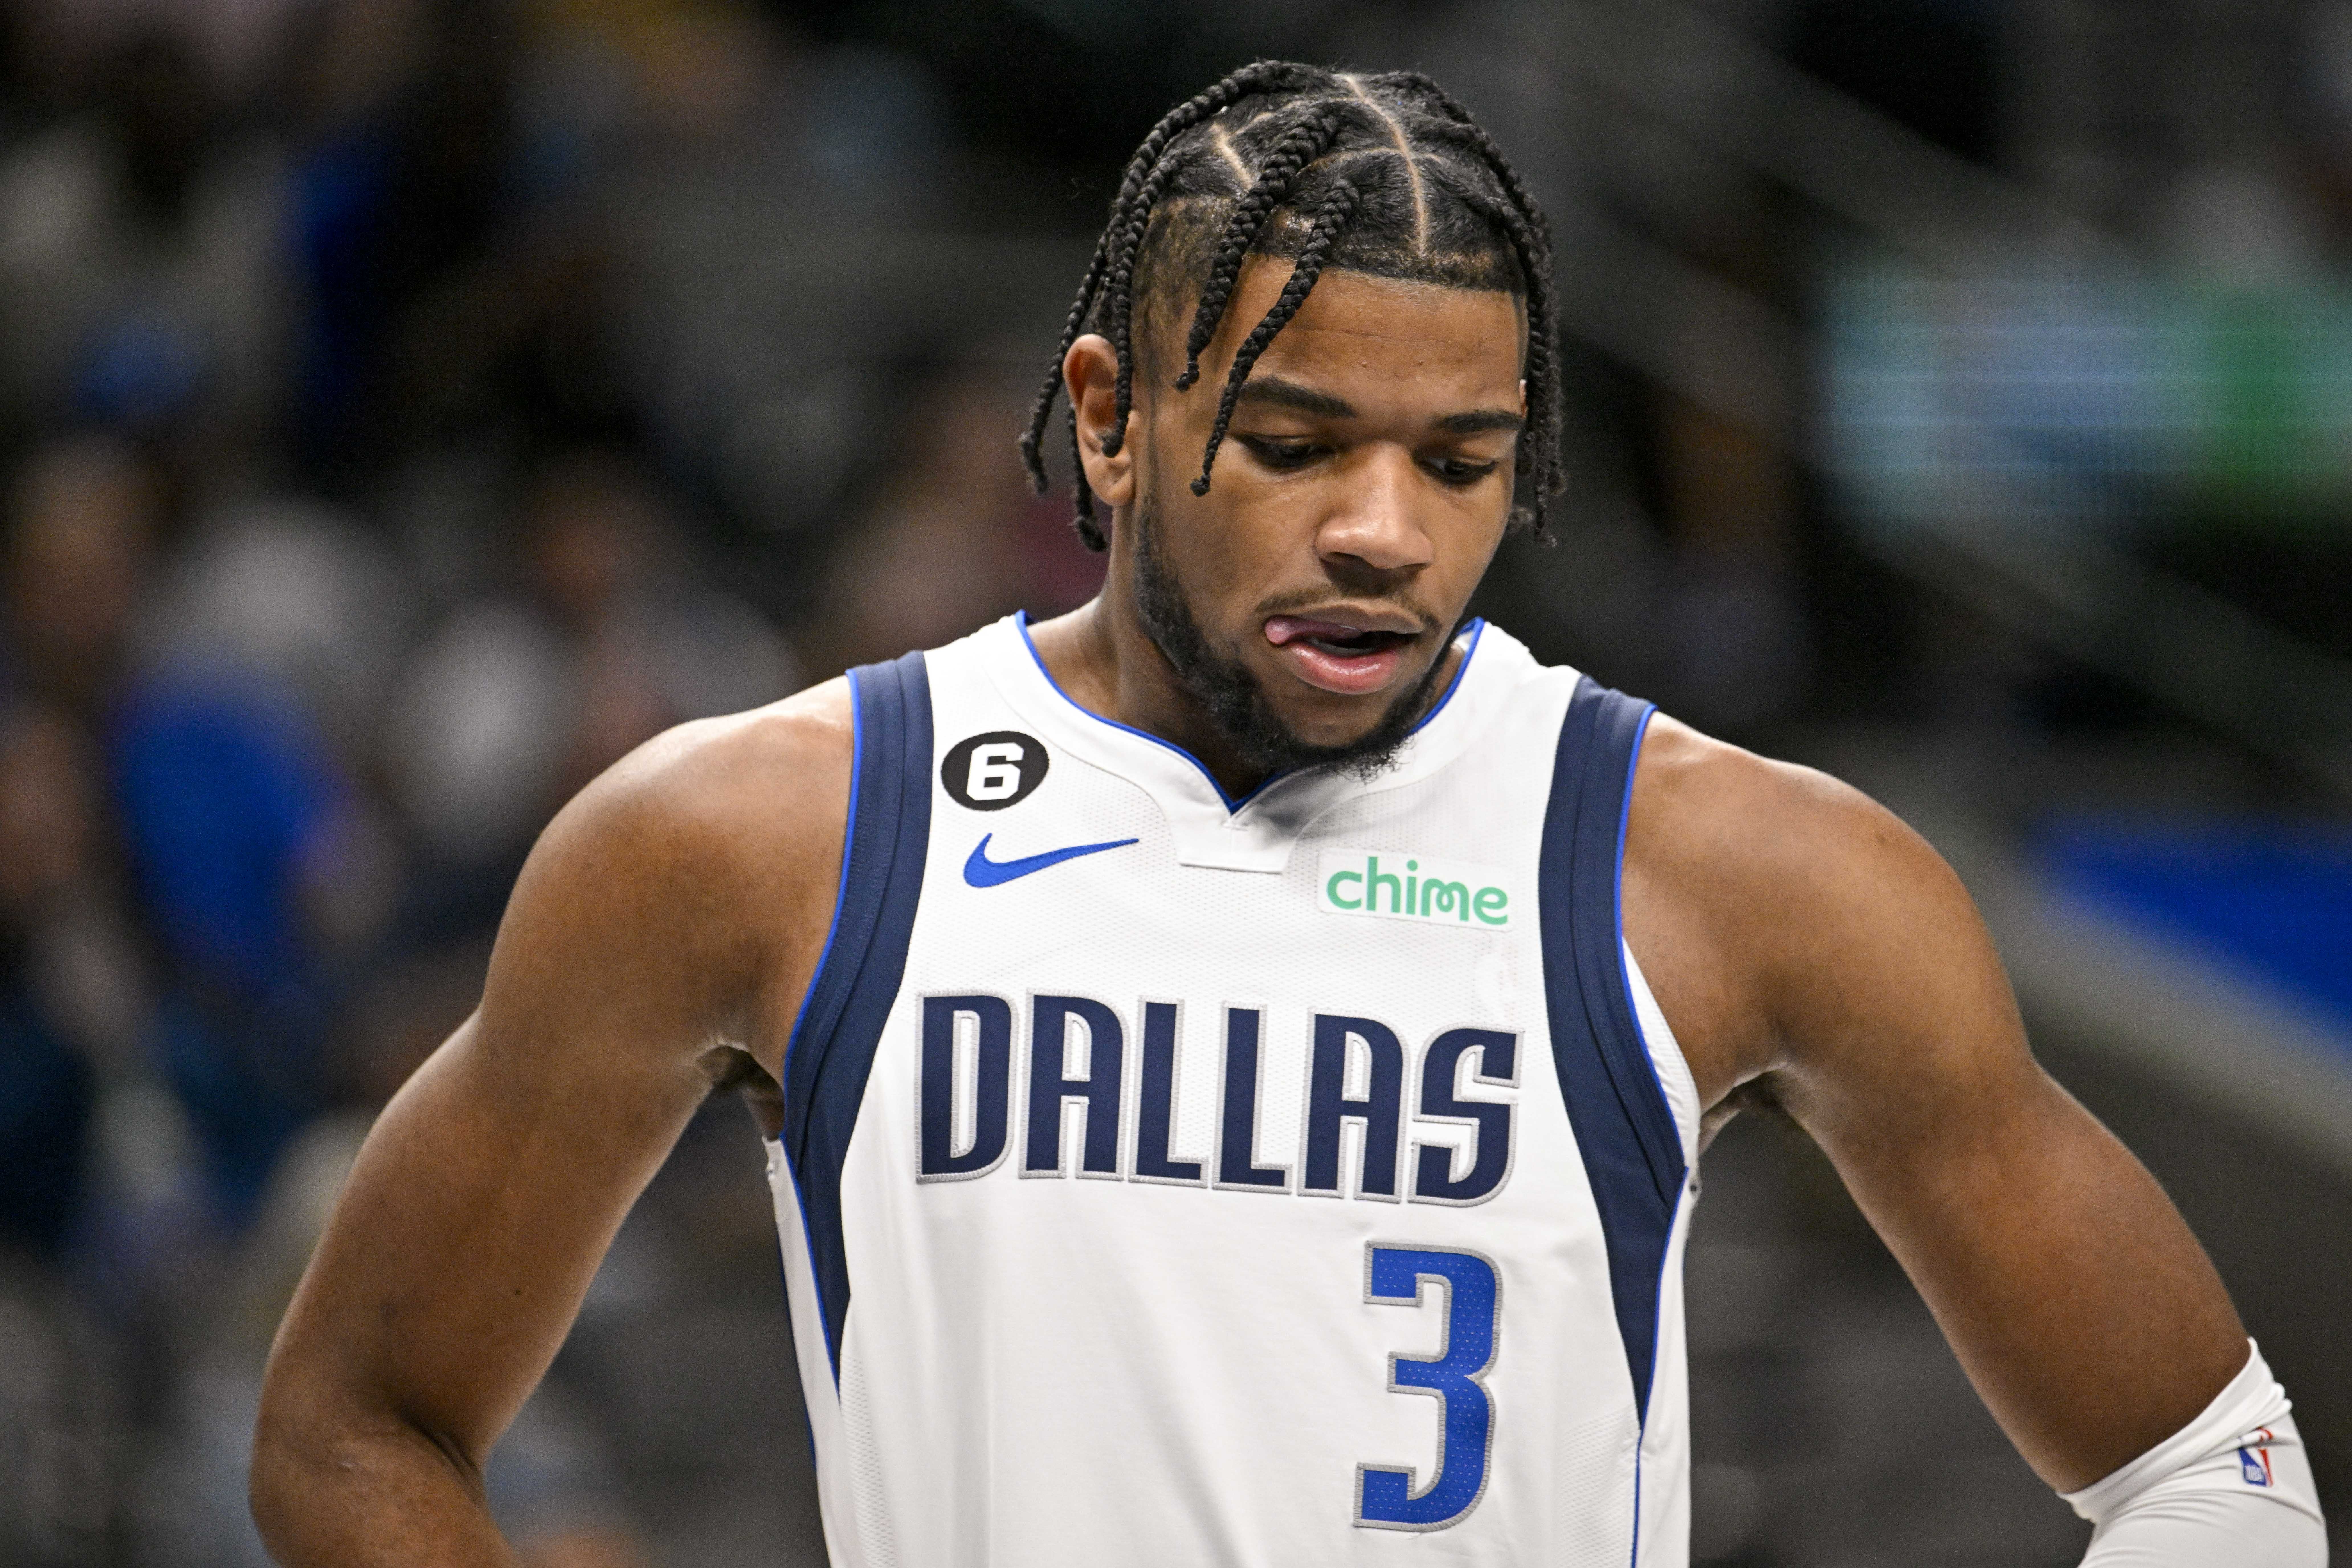 Mavs Rookie Jaden Hardy Gets HOT For 21 PTS (16 In The 4th)🔥 